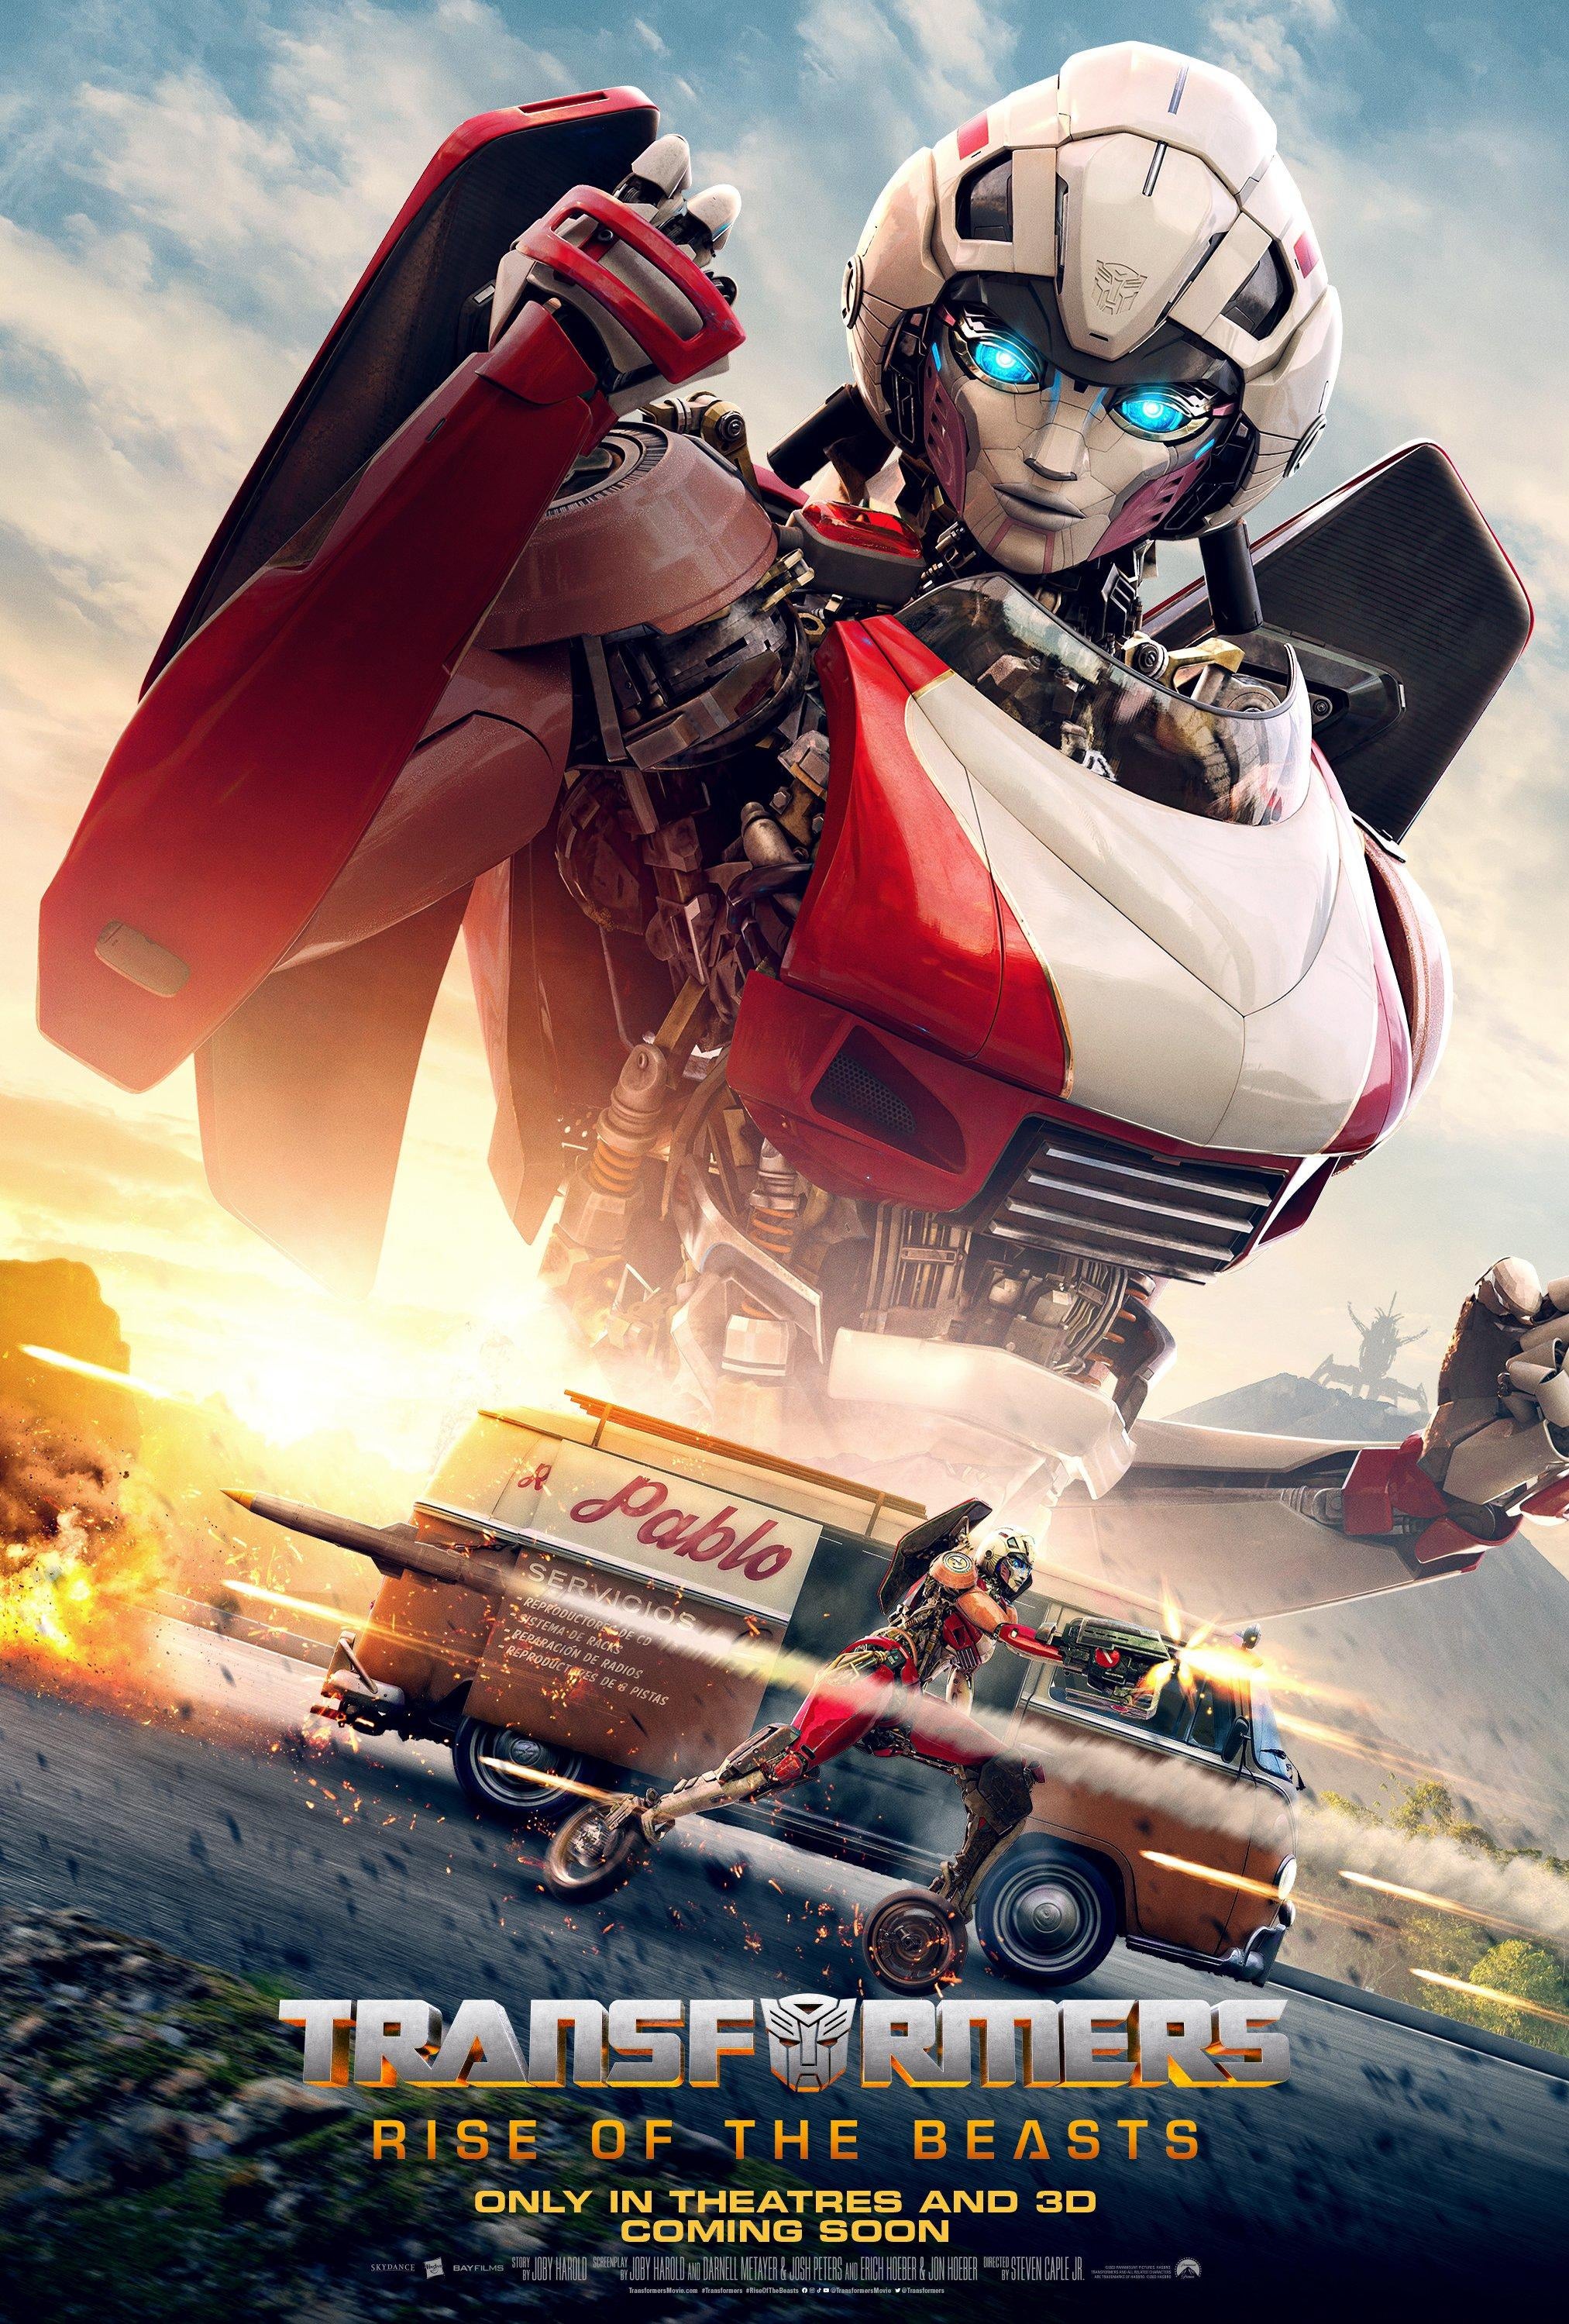 New Transformers Rise of the Beasts Posters Reveals Main Characters